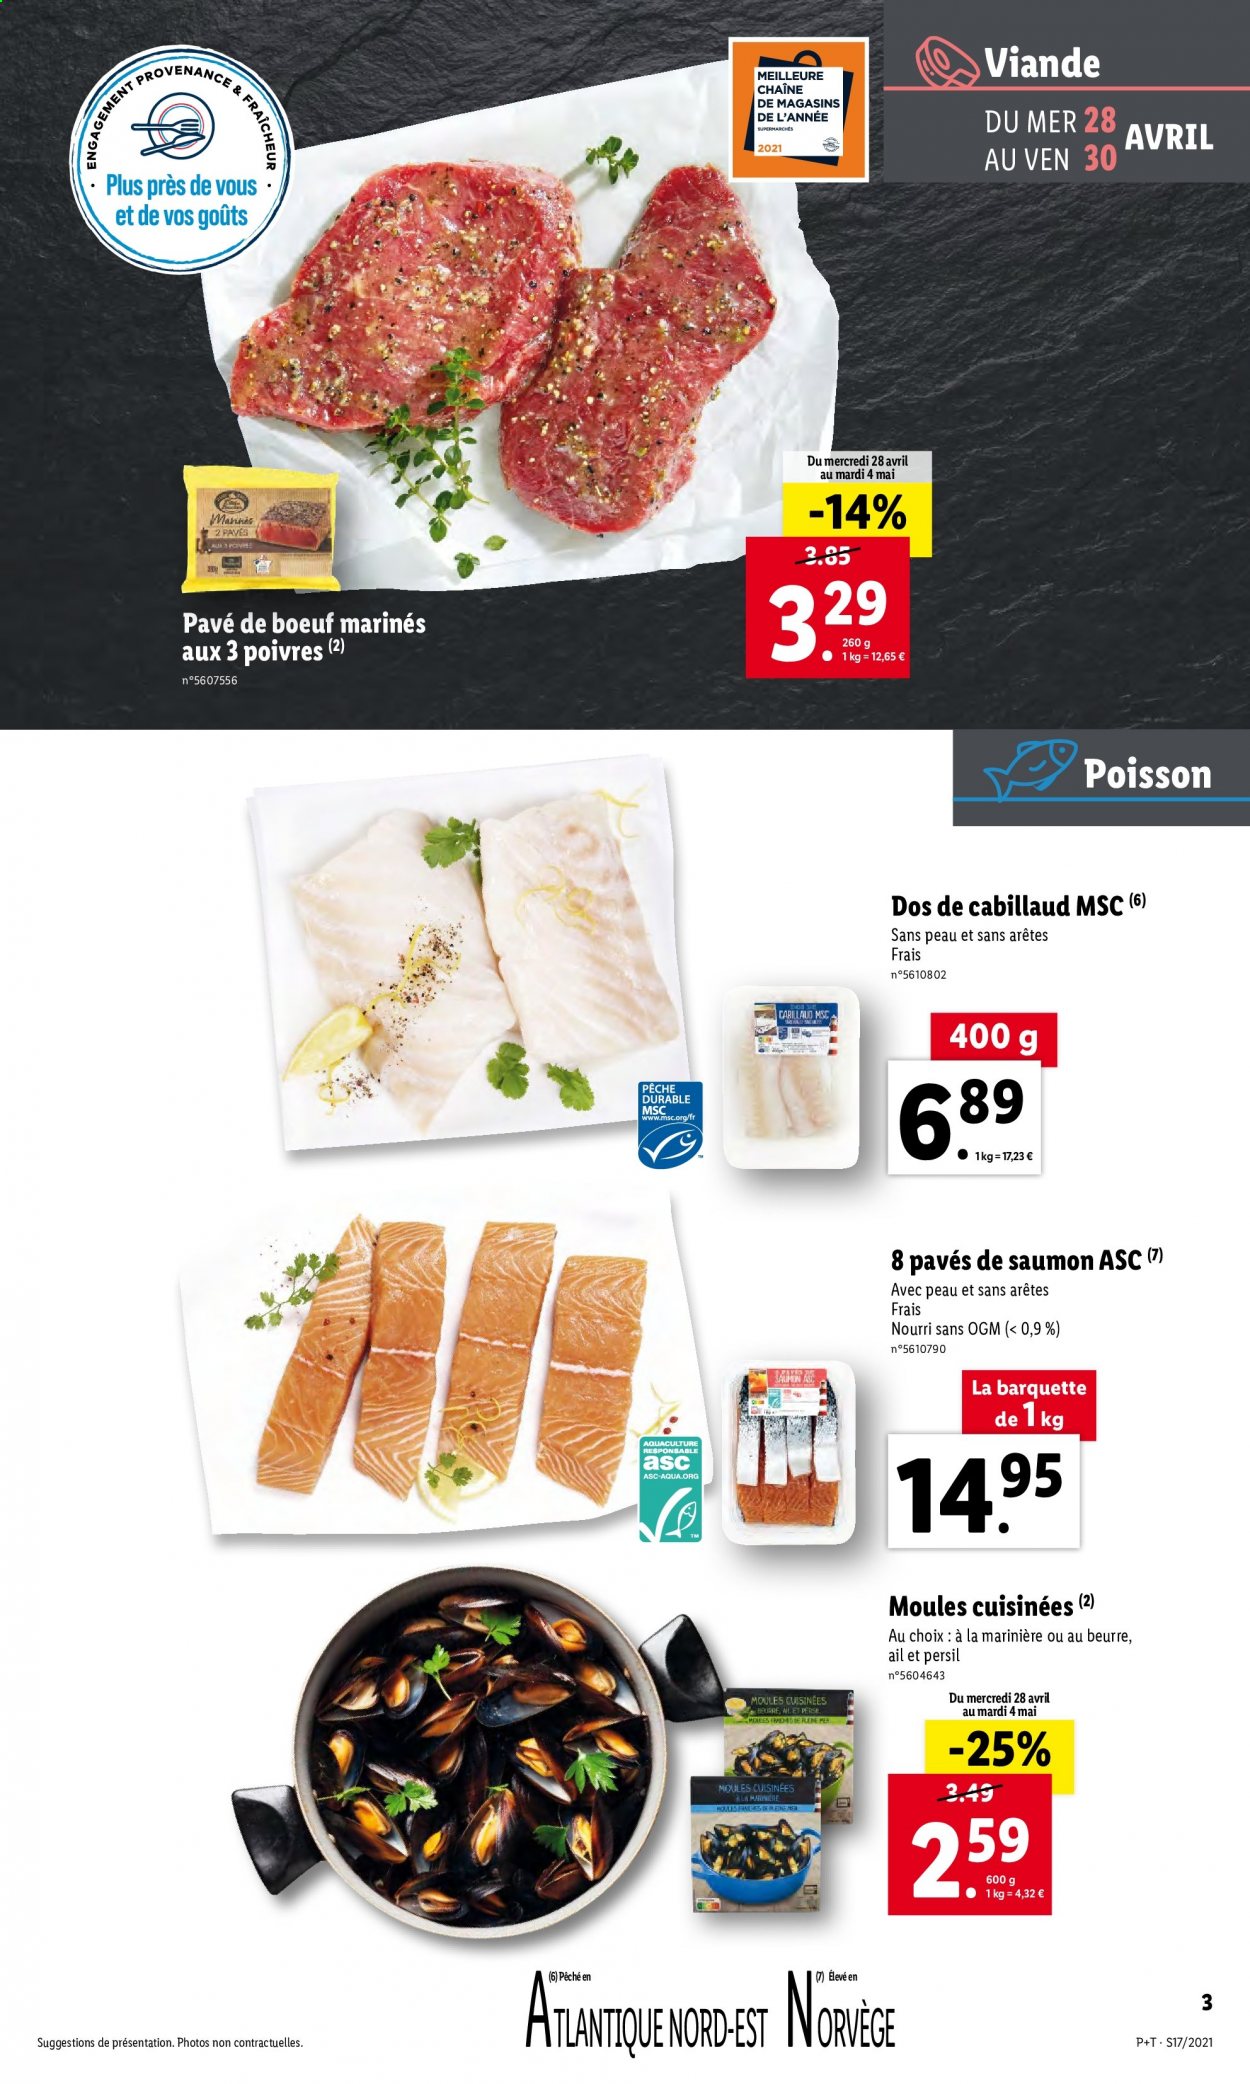 Catalogue Lidl - 28.04.2021 - 04.05.2021. Page 3.